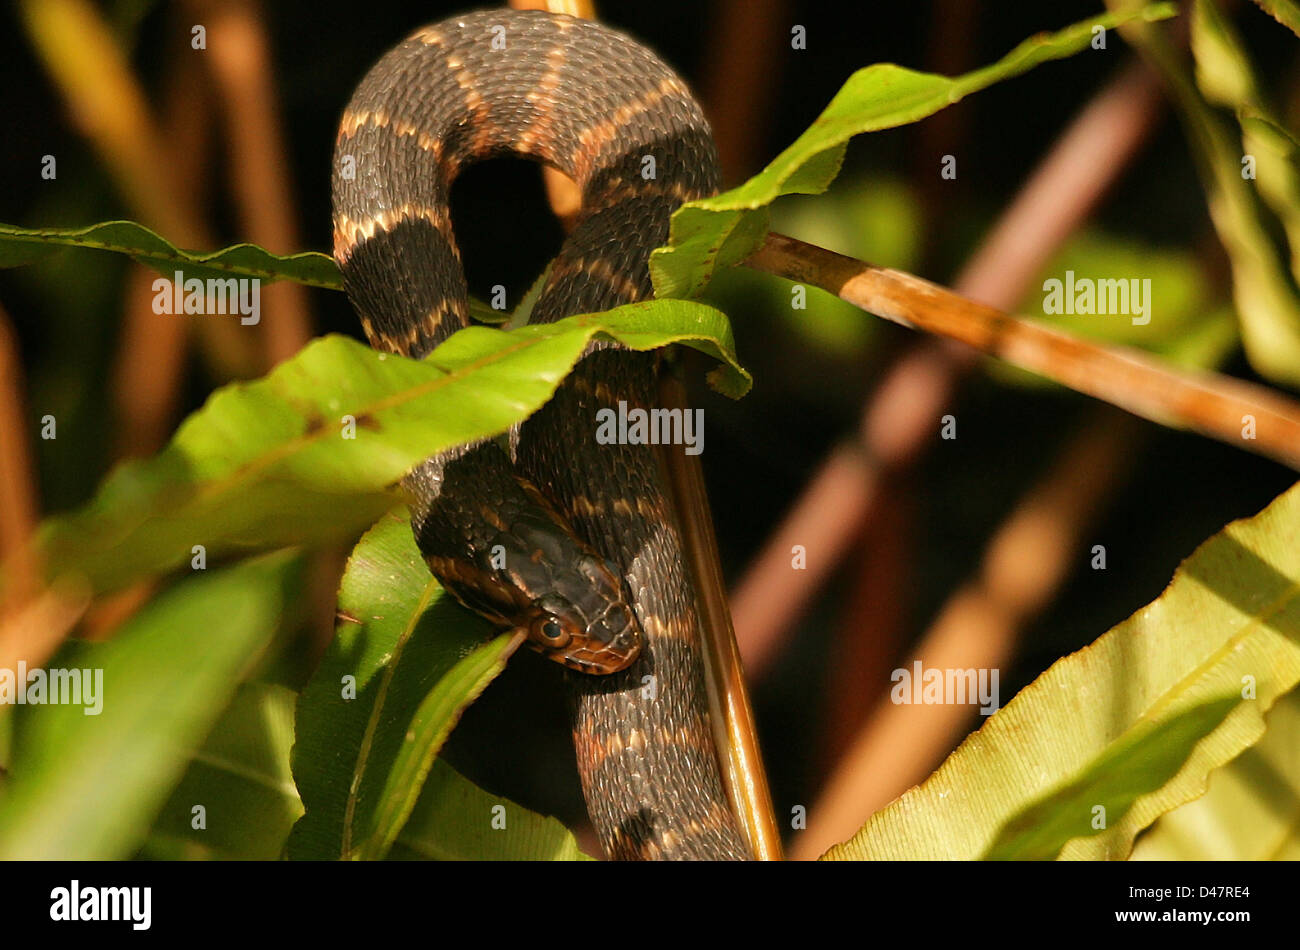 YOUNG WATERSNAKE IN SUN Stock Photo